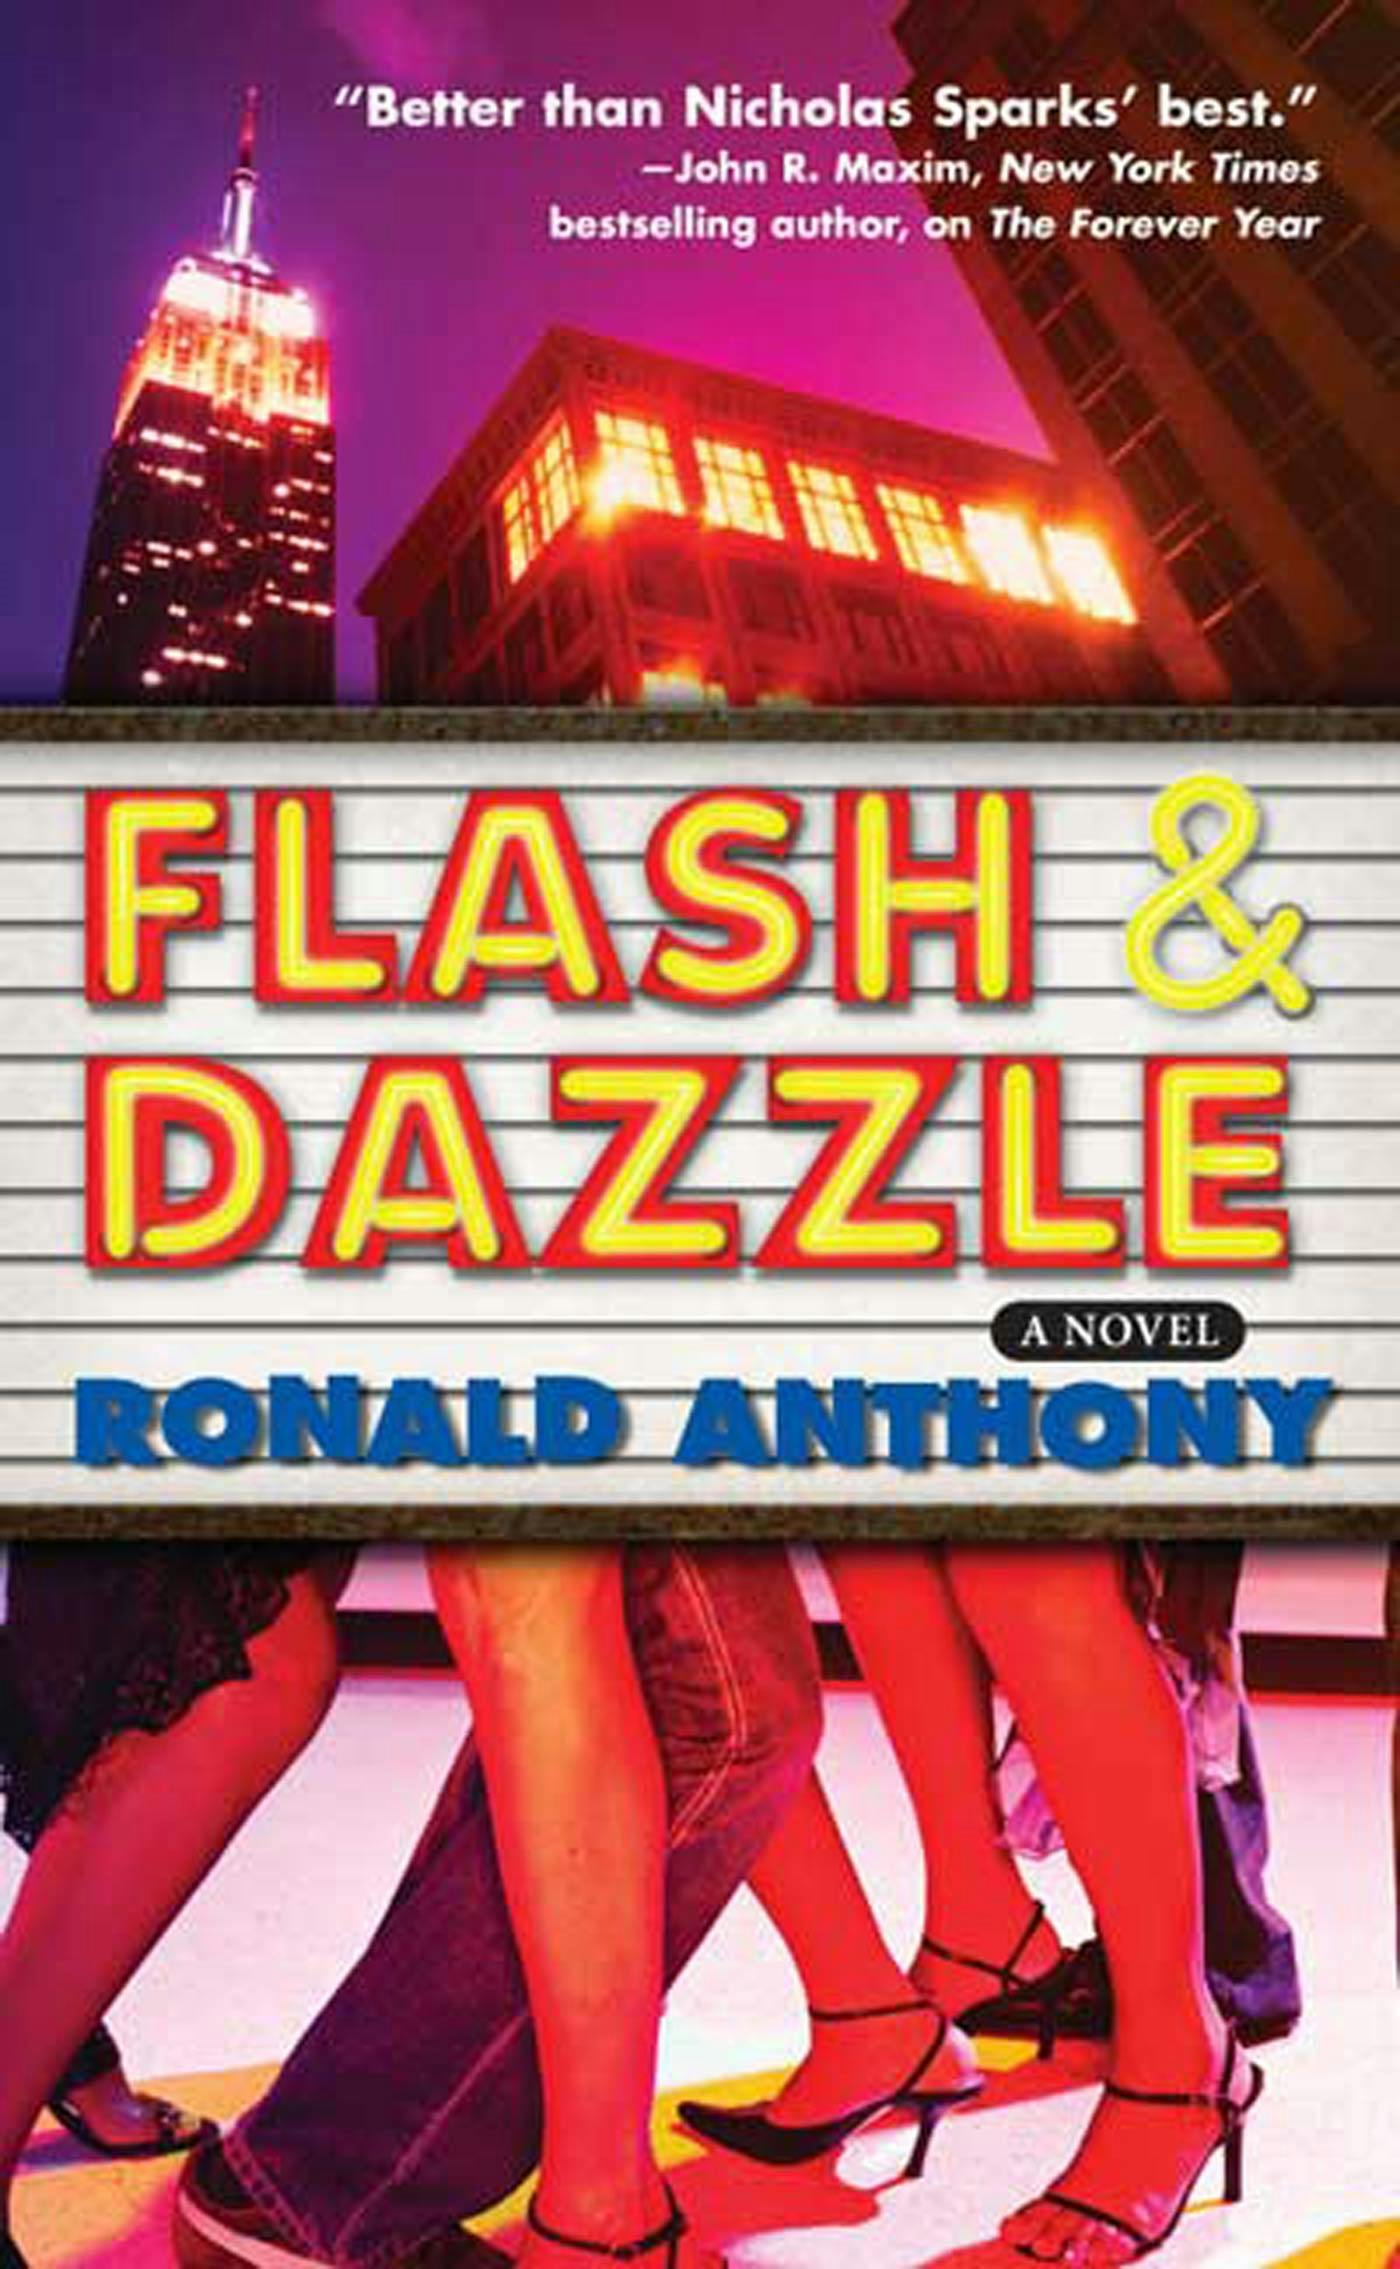 Cover for the book titled as: Flash and Dazzle